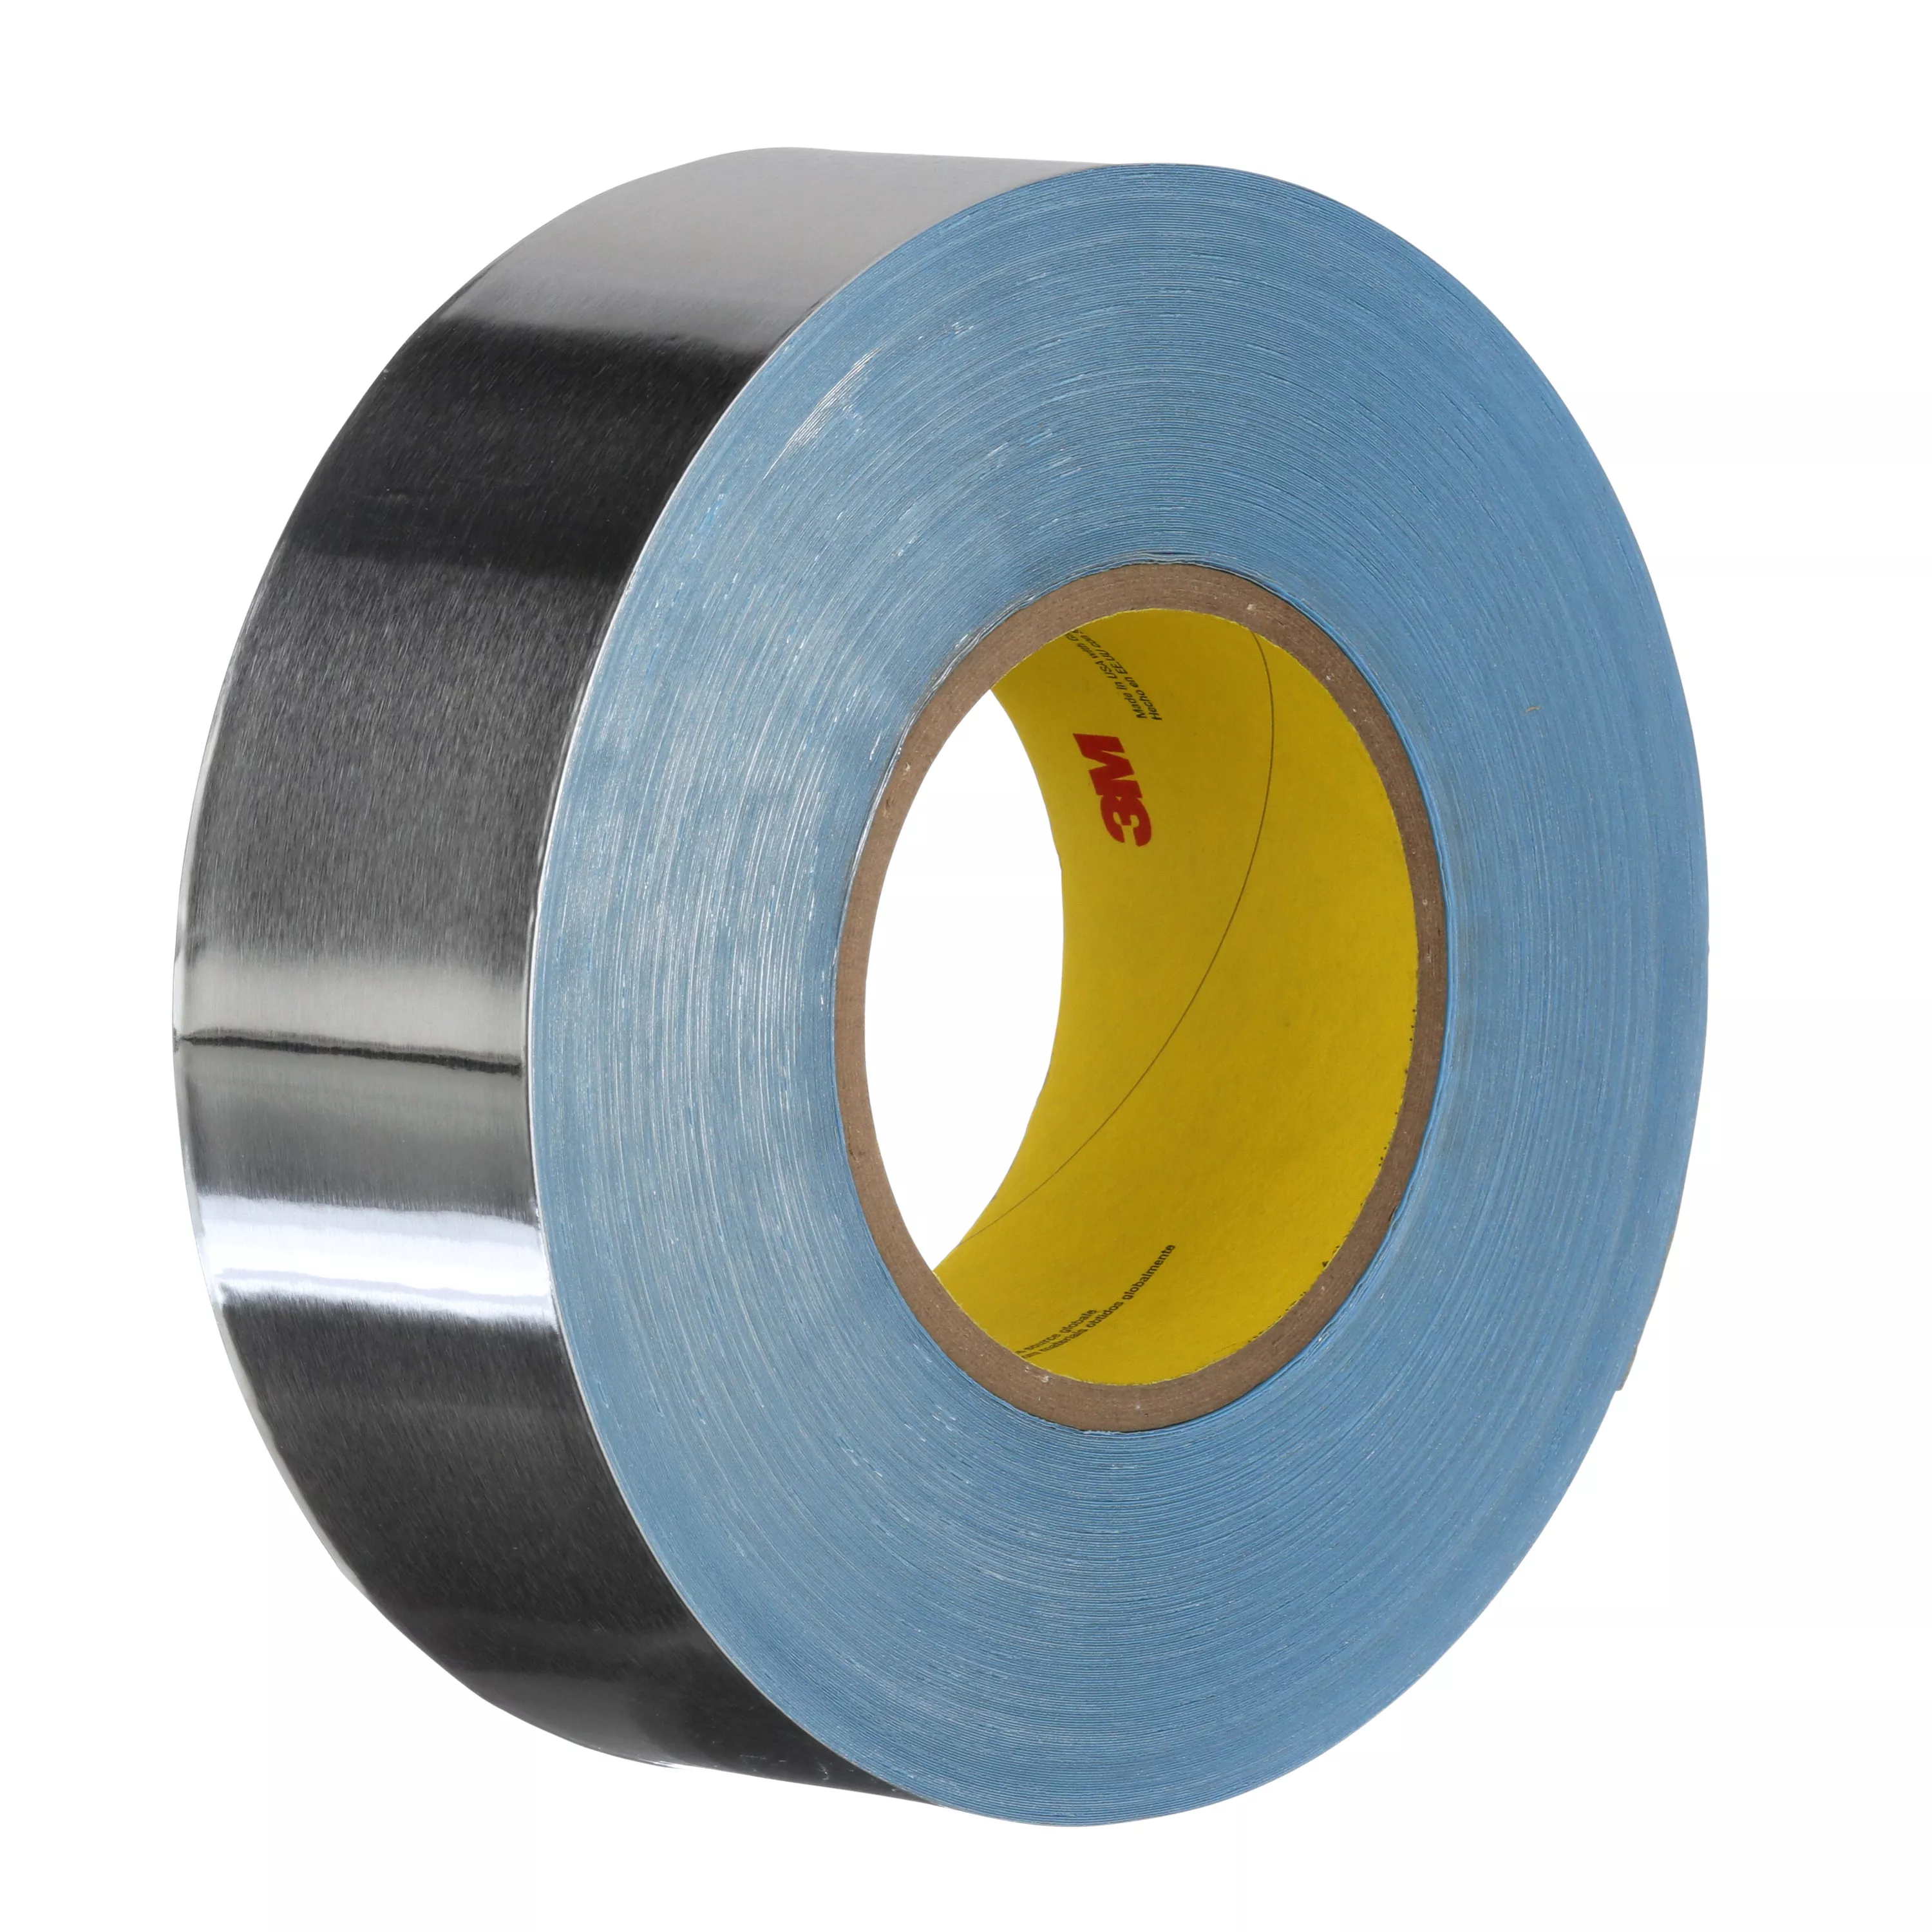 Product Number 434 | 3M™ Vibration Damping Tape 434